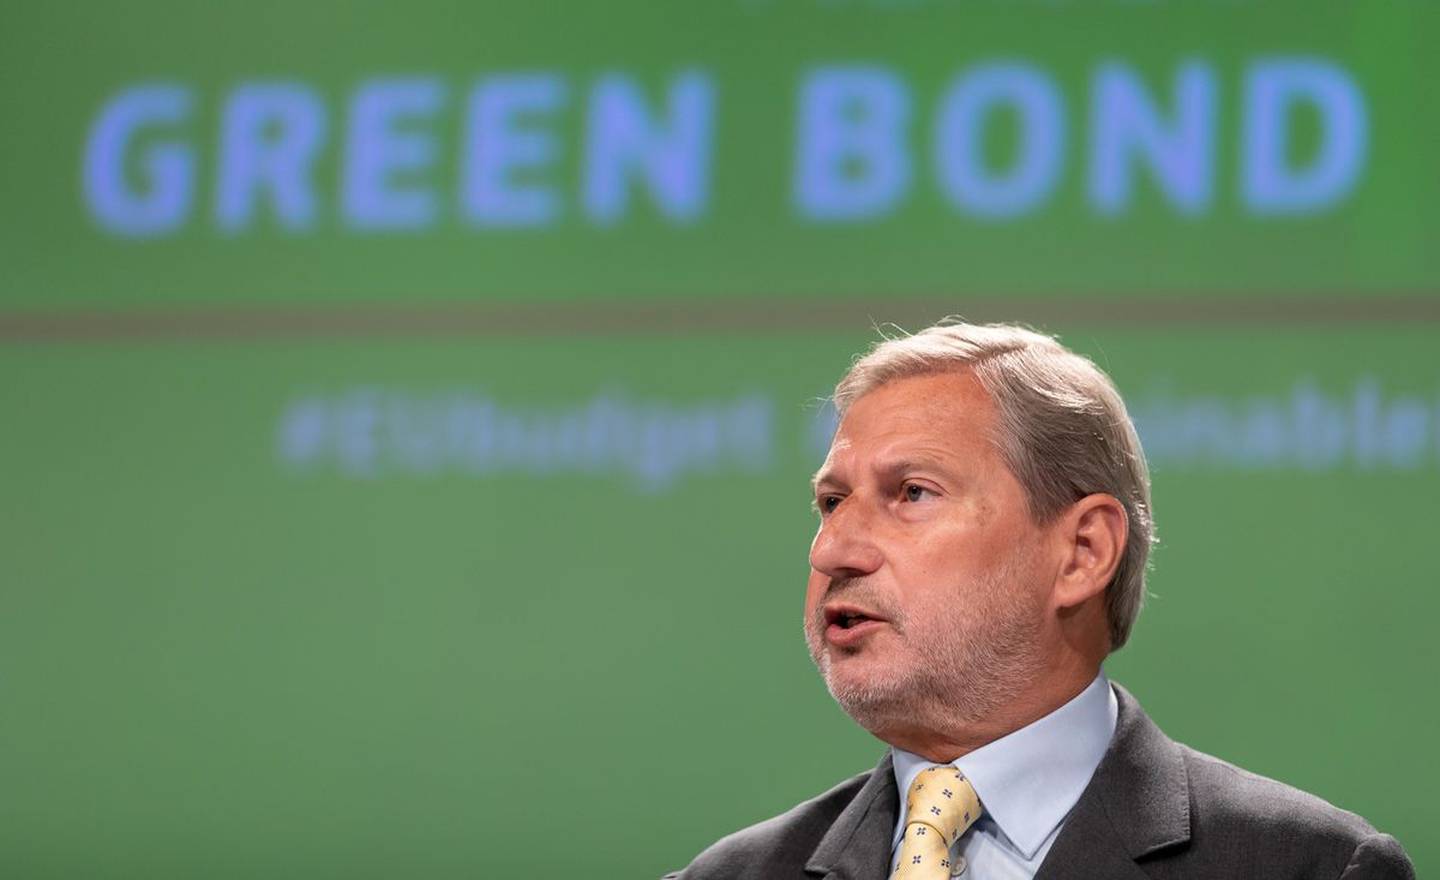 He talks to media about an independently evaluated Green Bond framework, thus taking a step forward towards the issuance of up to 250 billion green bonds, or 30% of NextGeneration EU's total issuance.